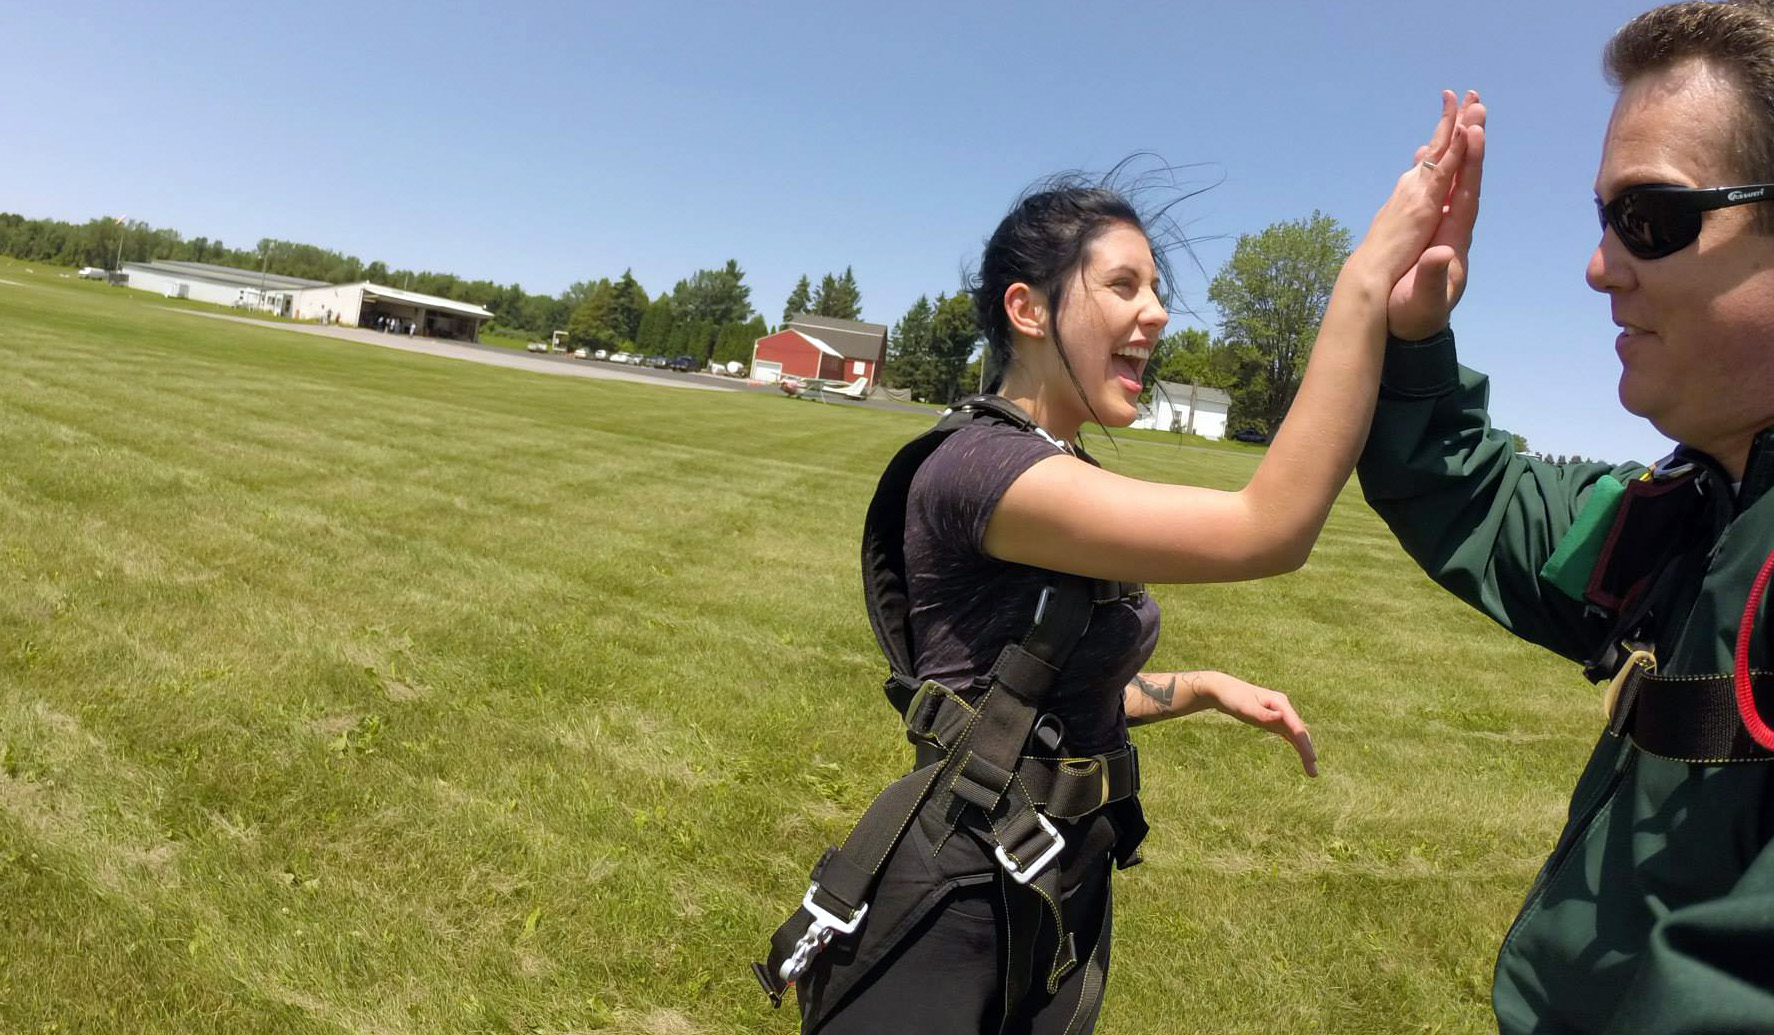 2 Skydivers - some of the happiest people in the world - high five each other after landing.